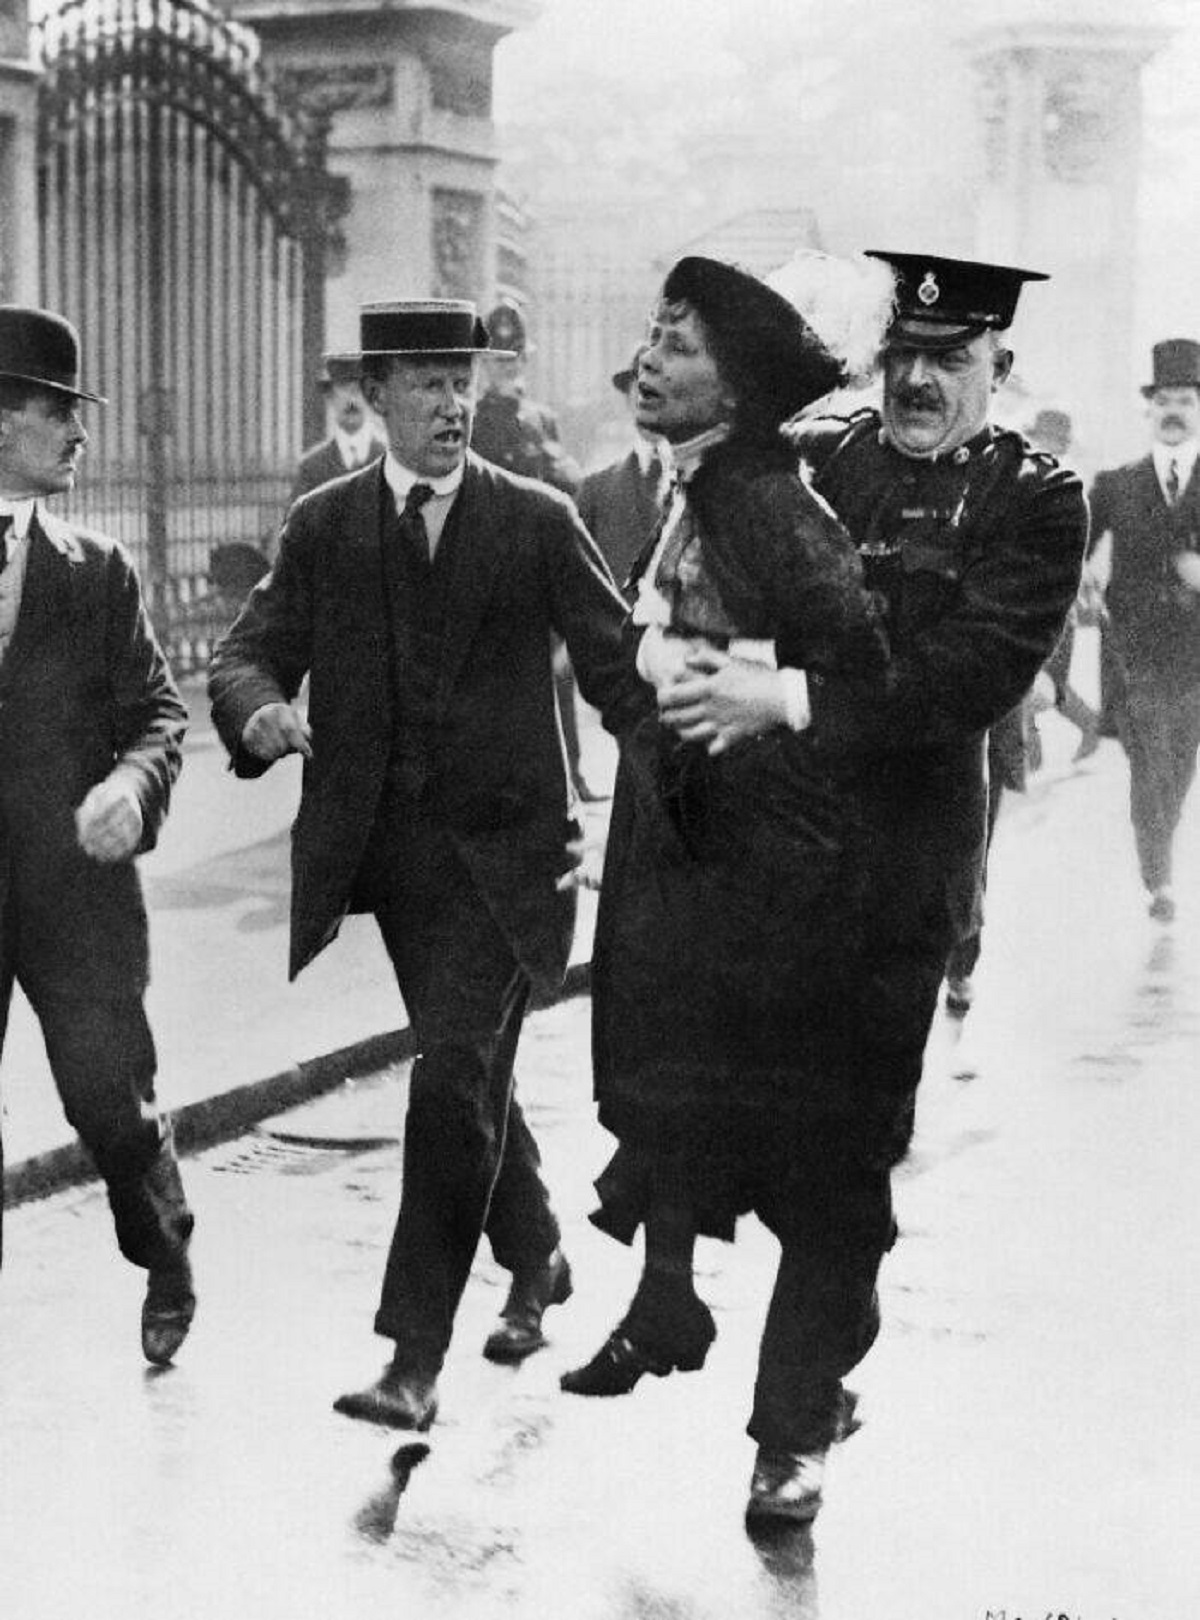 "Emmeline Pankhurst Arrested Outside Buckingham Palace, 1914"

"Suffragette leader Emmeline Pankhurst being carried away from Buckingham Palace in London, England after being arrested while trying to present a petition to King George V of the United Kingdom, 21st May 1914."